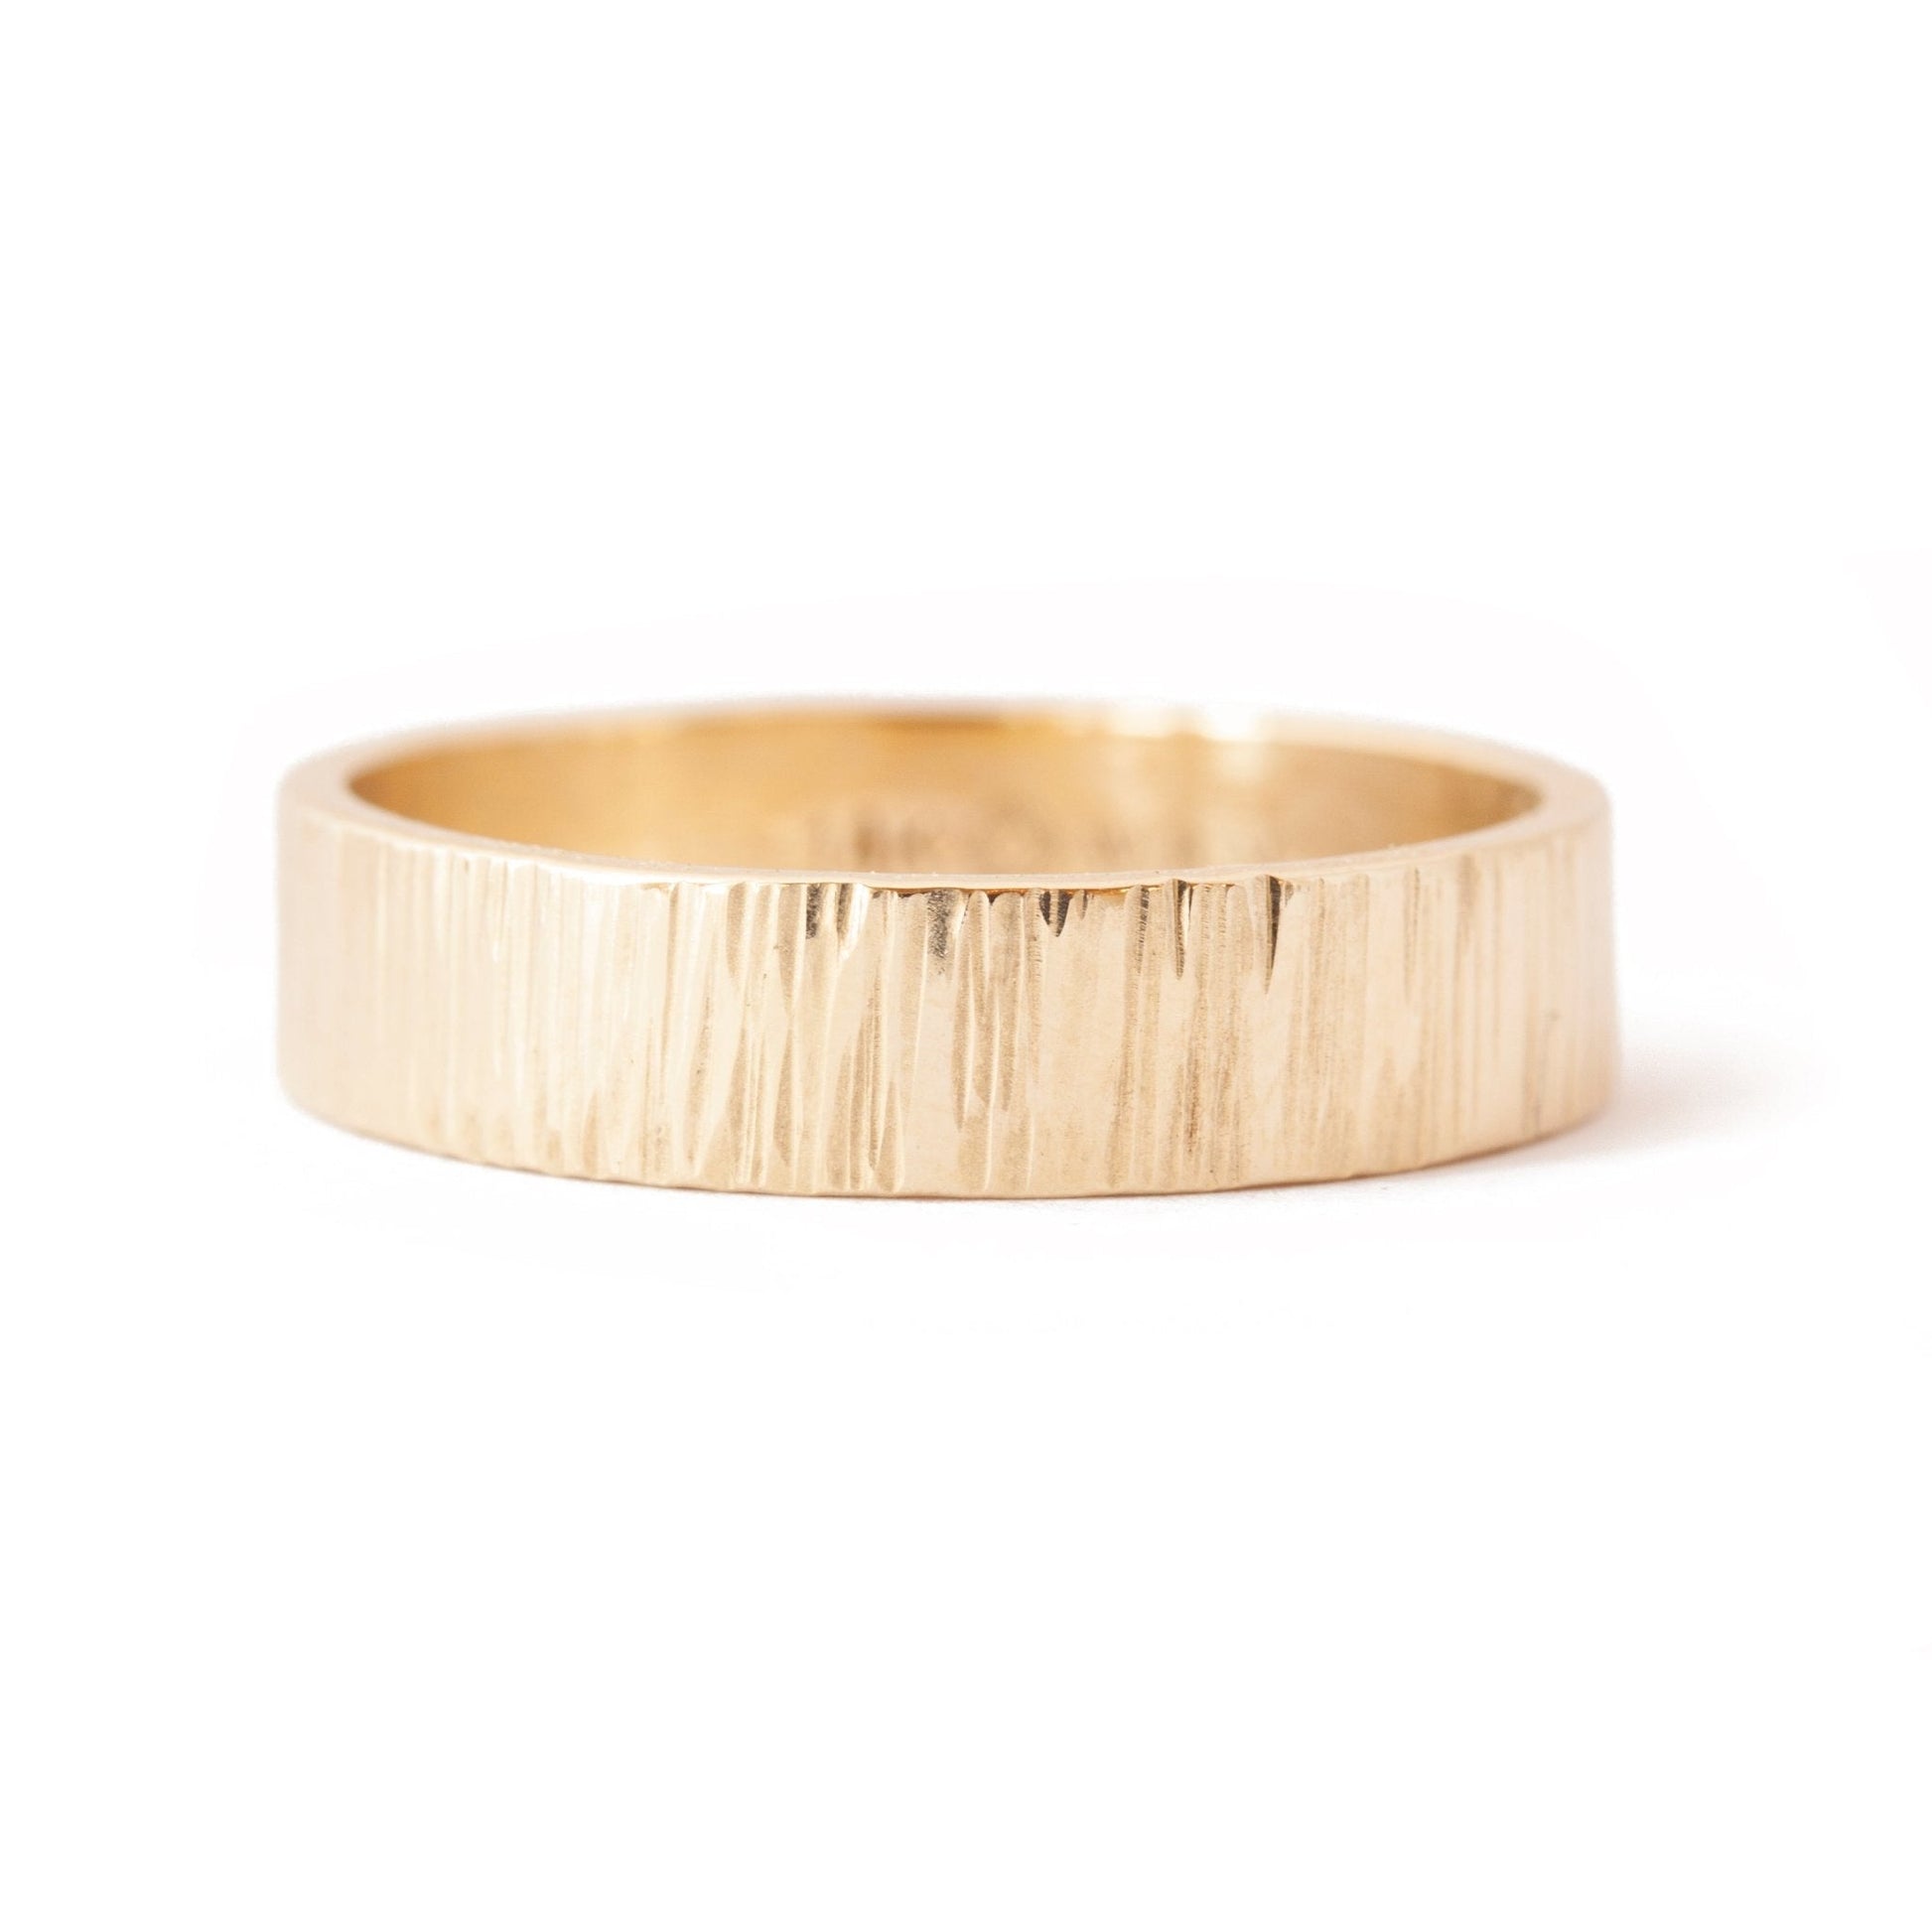 The Thatched Band (Ready to ship in 5mm width 14K yellow gold size 10.25) - W.R. Metalarts